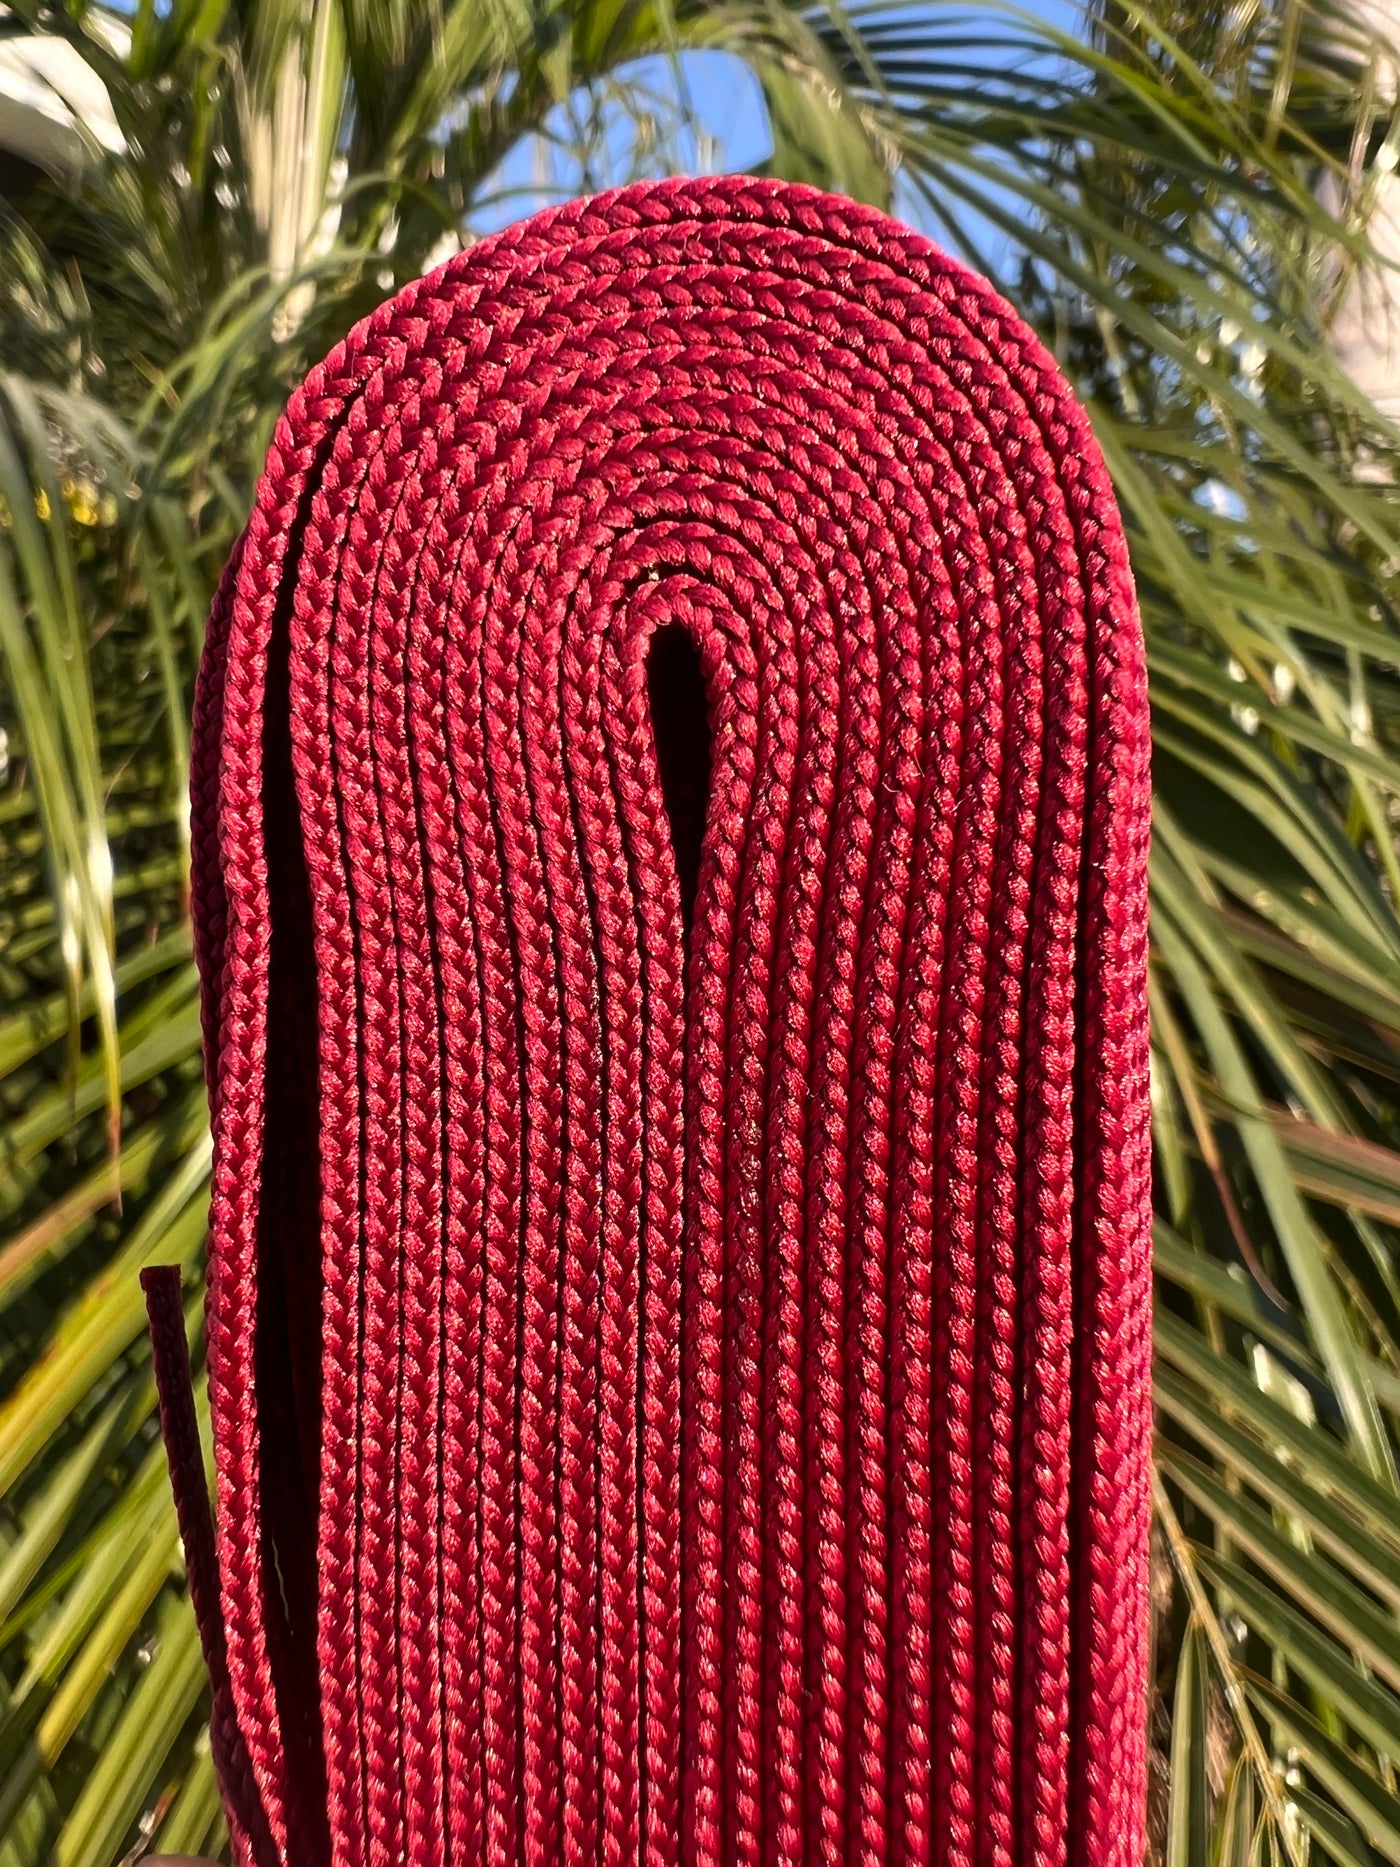 Cardinal Red – 96 inch (244 cm) CORE Shoelace by Derby Laces (NARROW 6MM WIDE LACE)